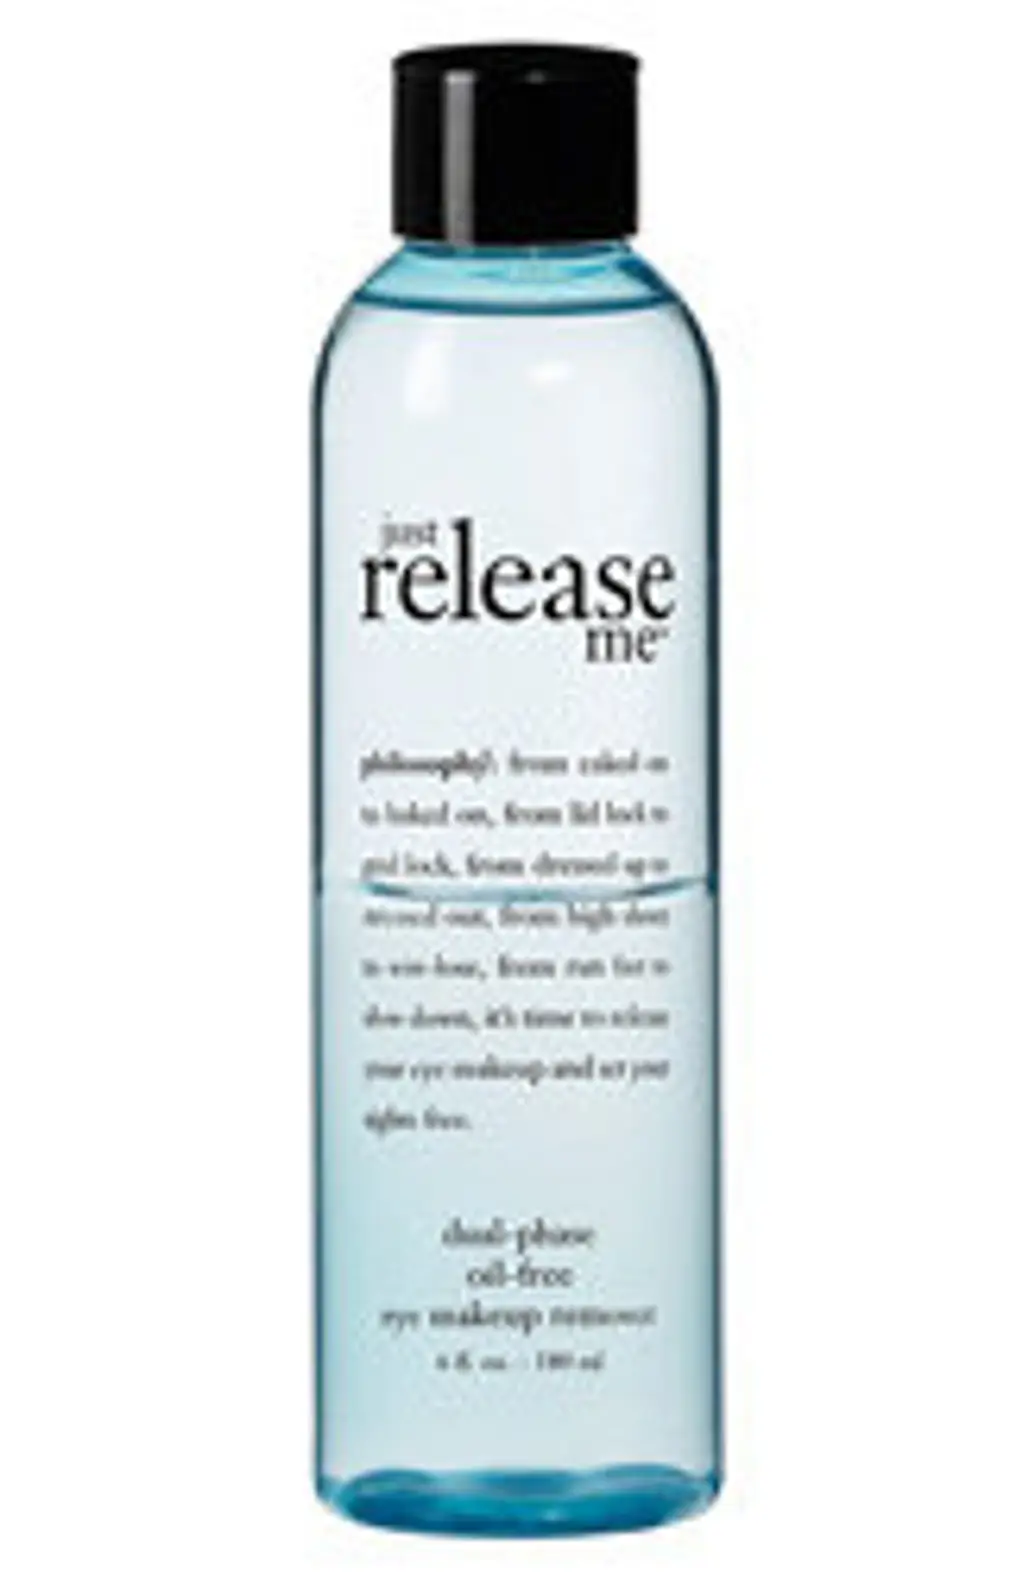 Philosophy ‘Just Release Me’ Eye Makeup Remover